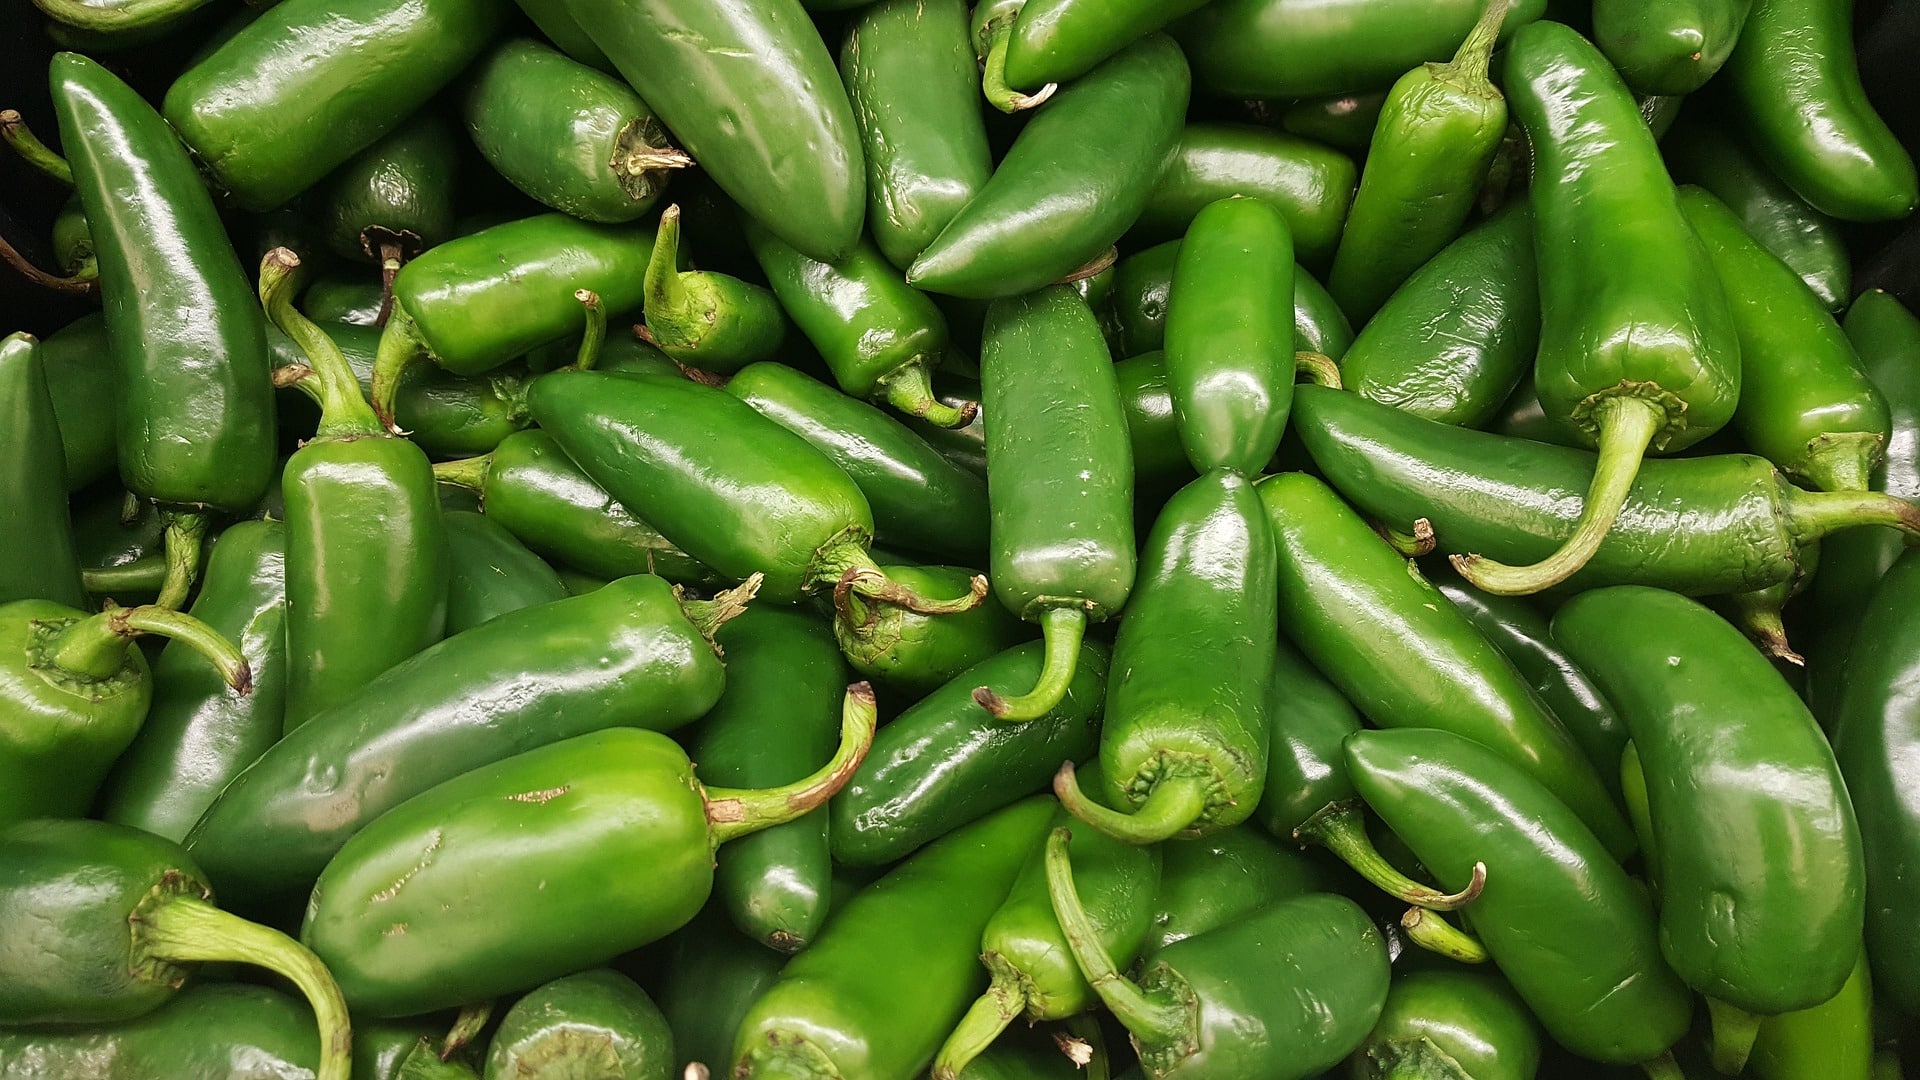 What can I do with jalapenos from my garden?